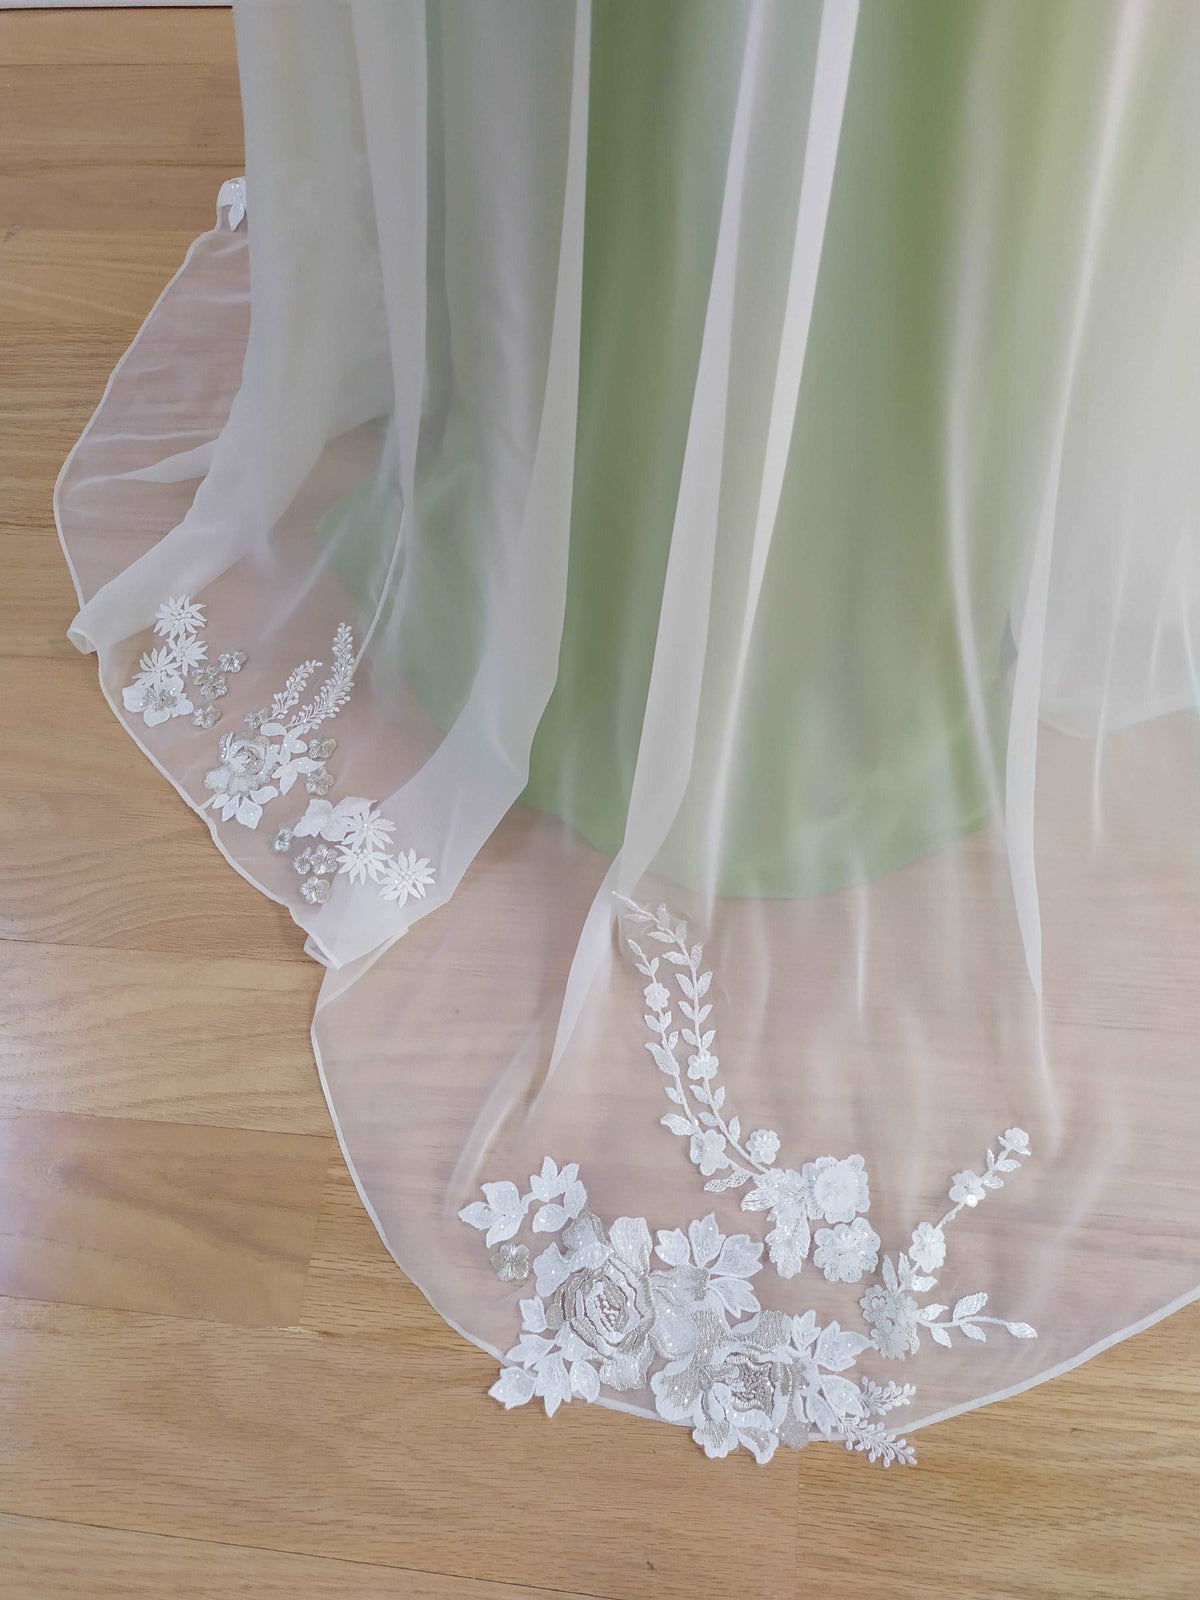 Romantic colorful green silk wedding dress with 3D floral applique. Ready to ship, size 2 petite. By Catherine Langlois